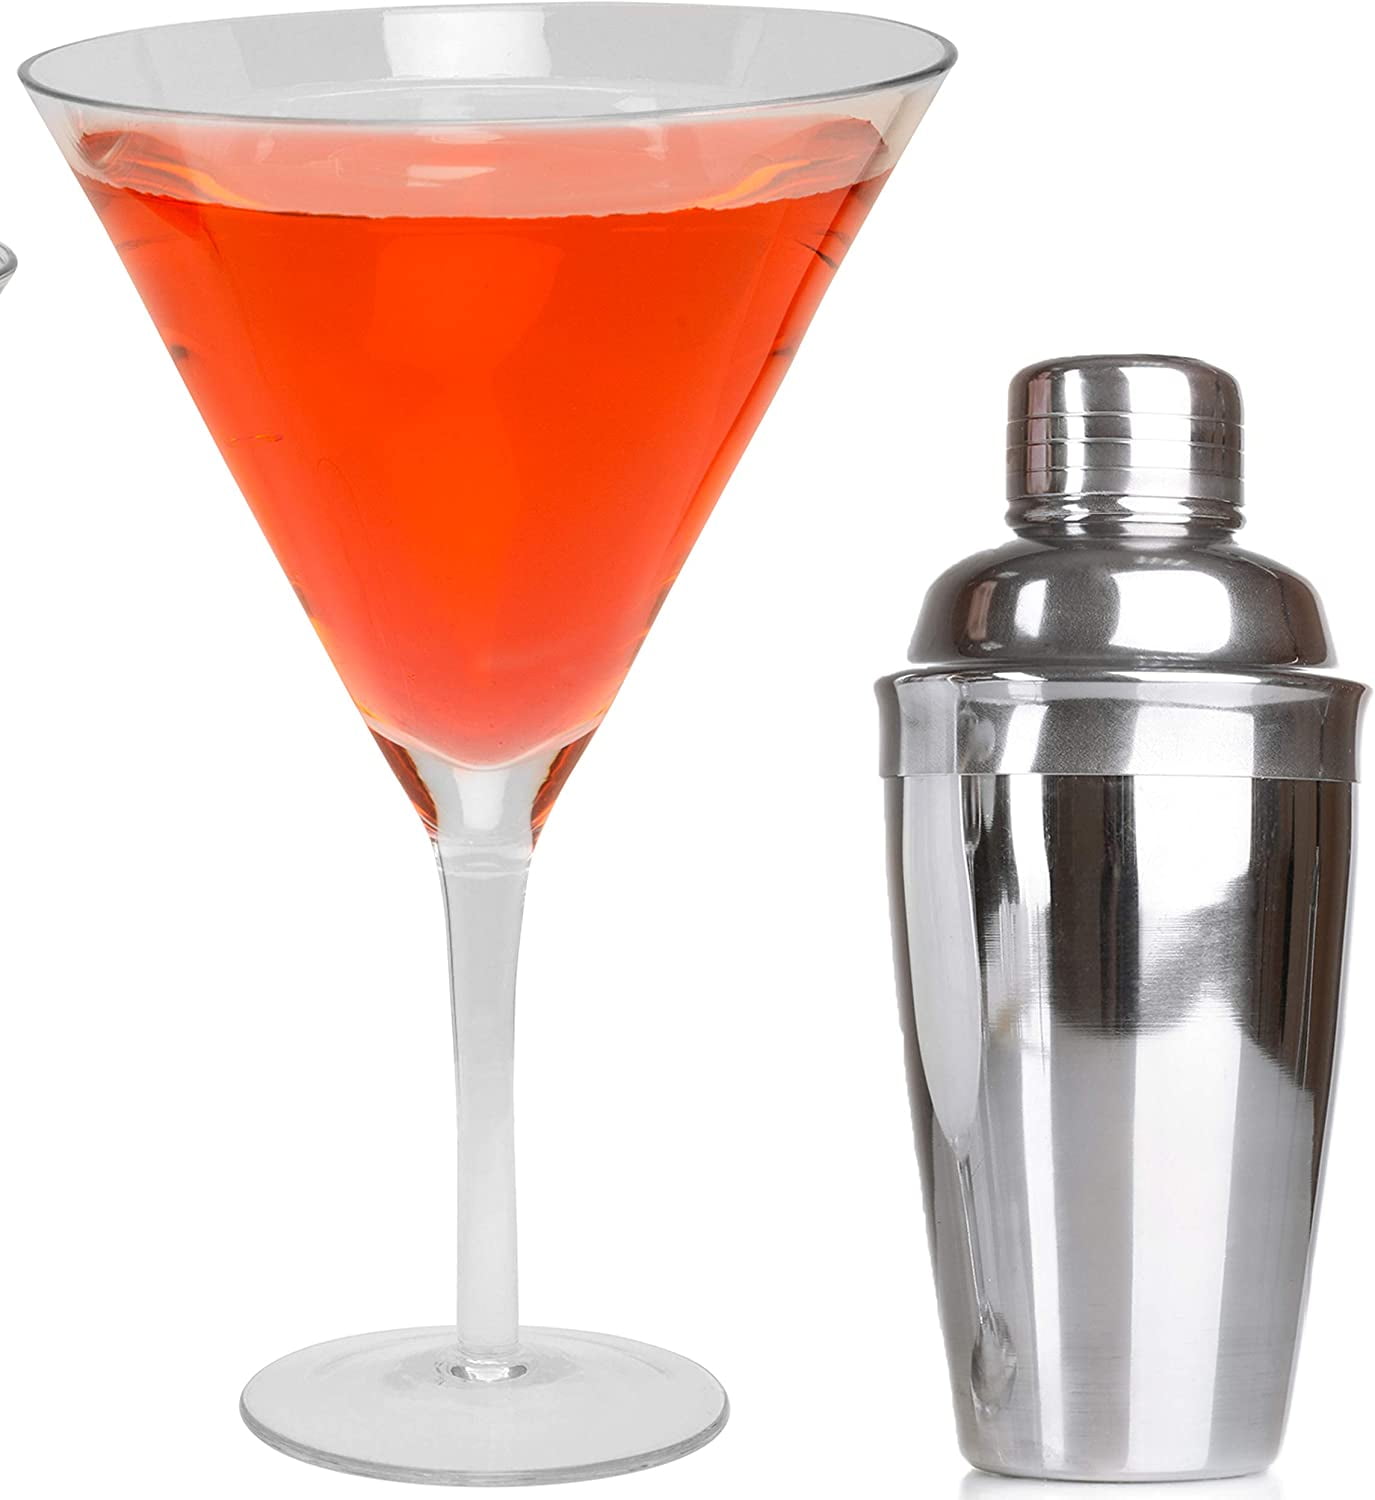 Cherie Bebe: Giant Martini Glass - Plunge Creations